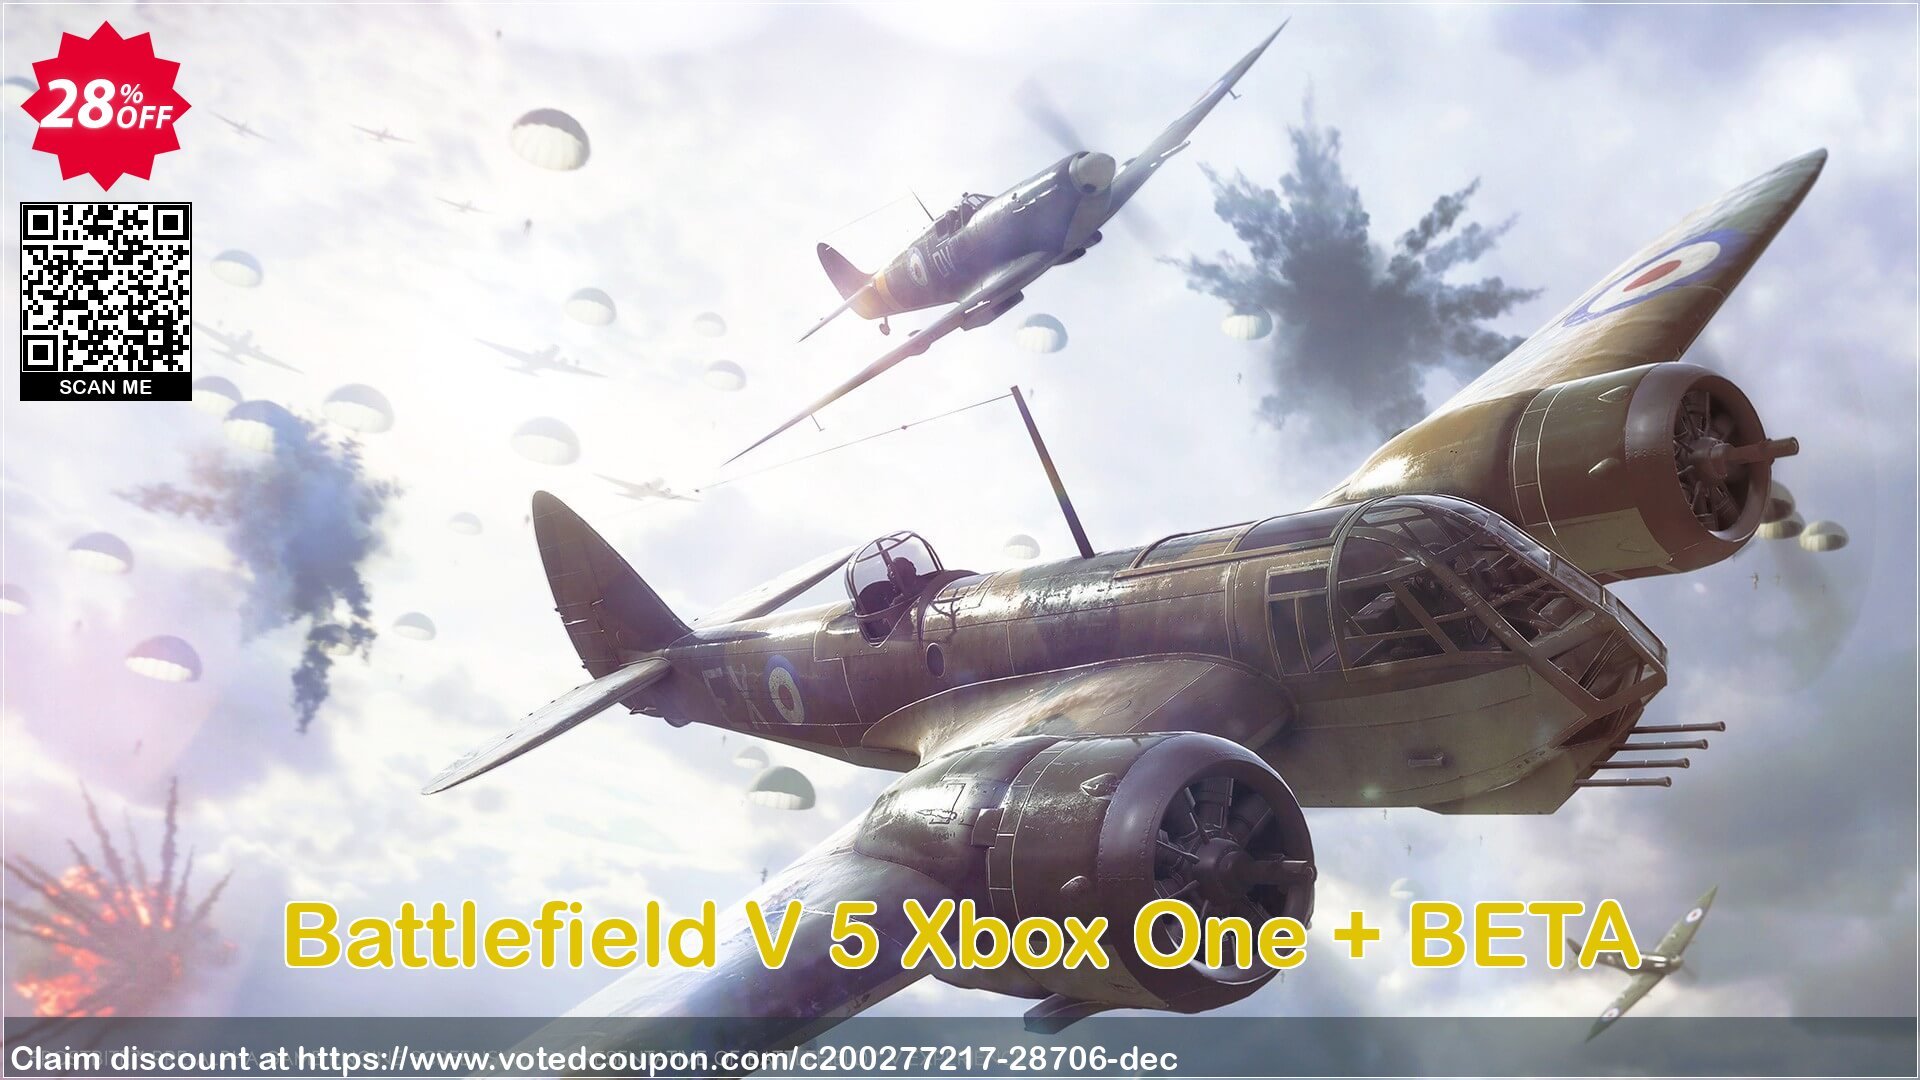 Battlefield V 5 Xbox One + BETA Coupon Code Apr 2024, 28% OFF - VotedCoupon